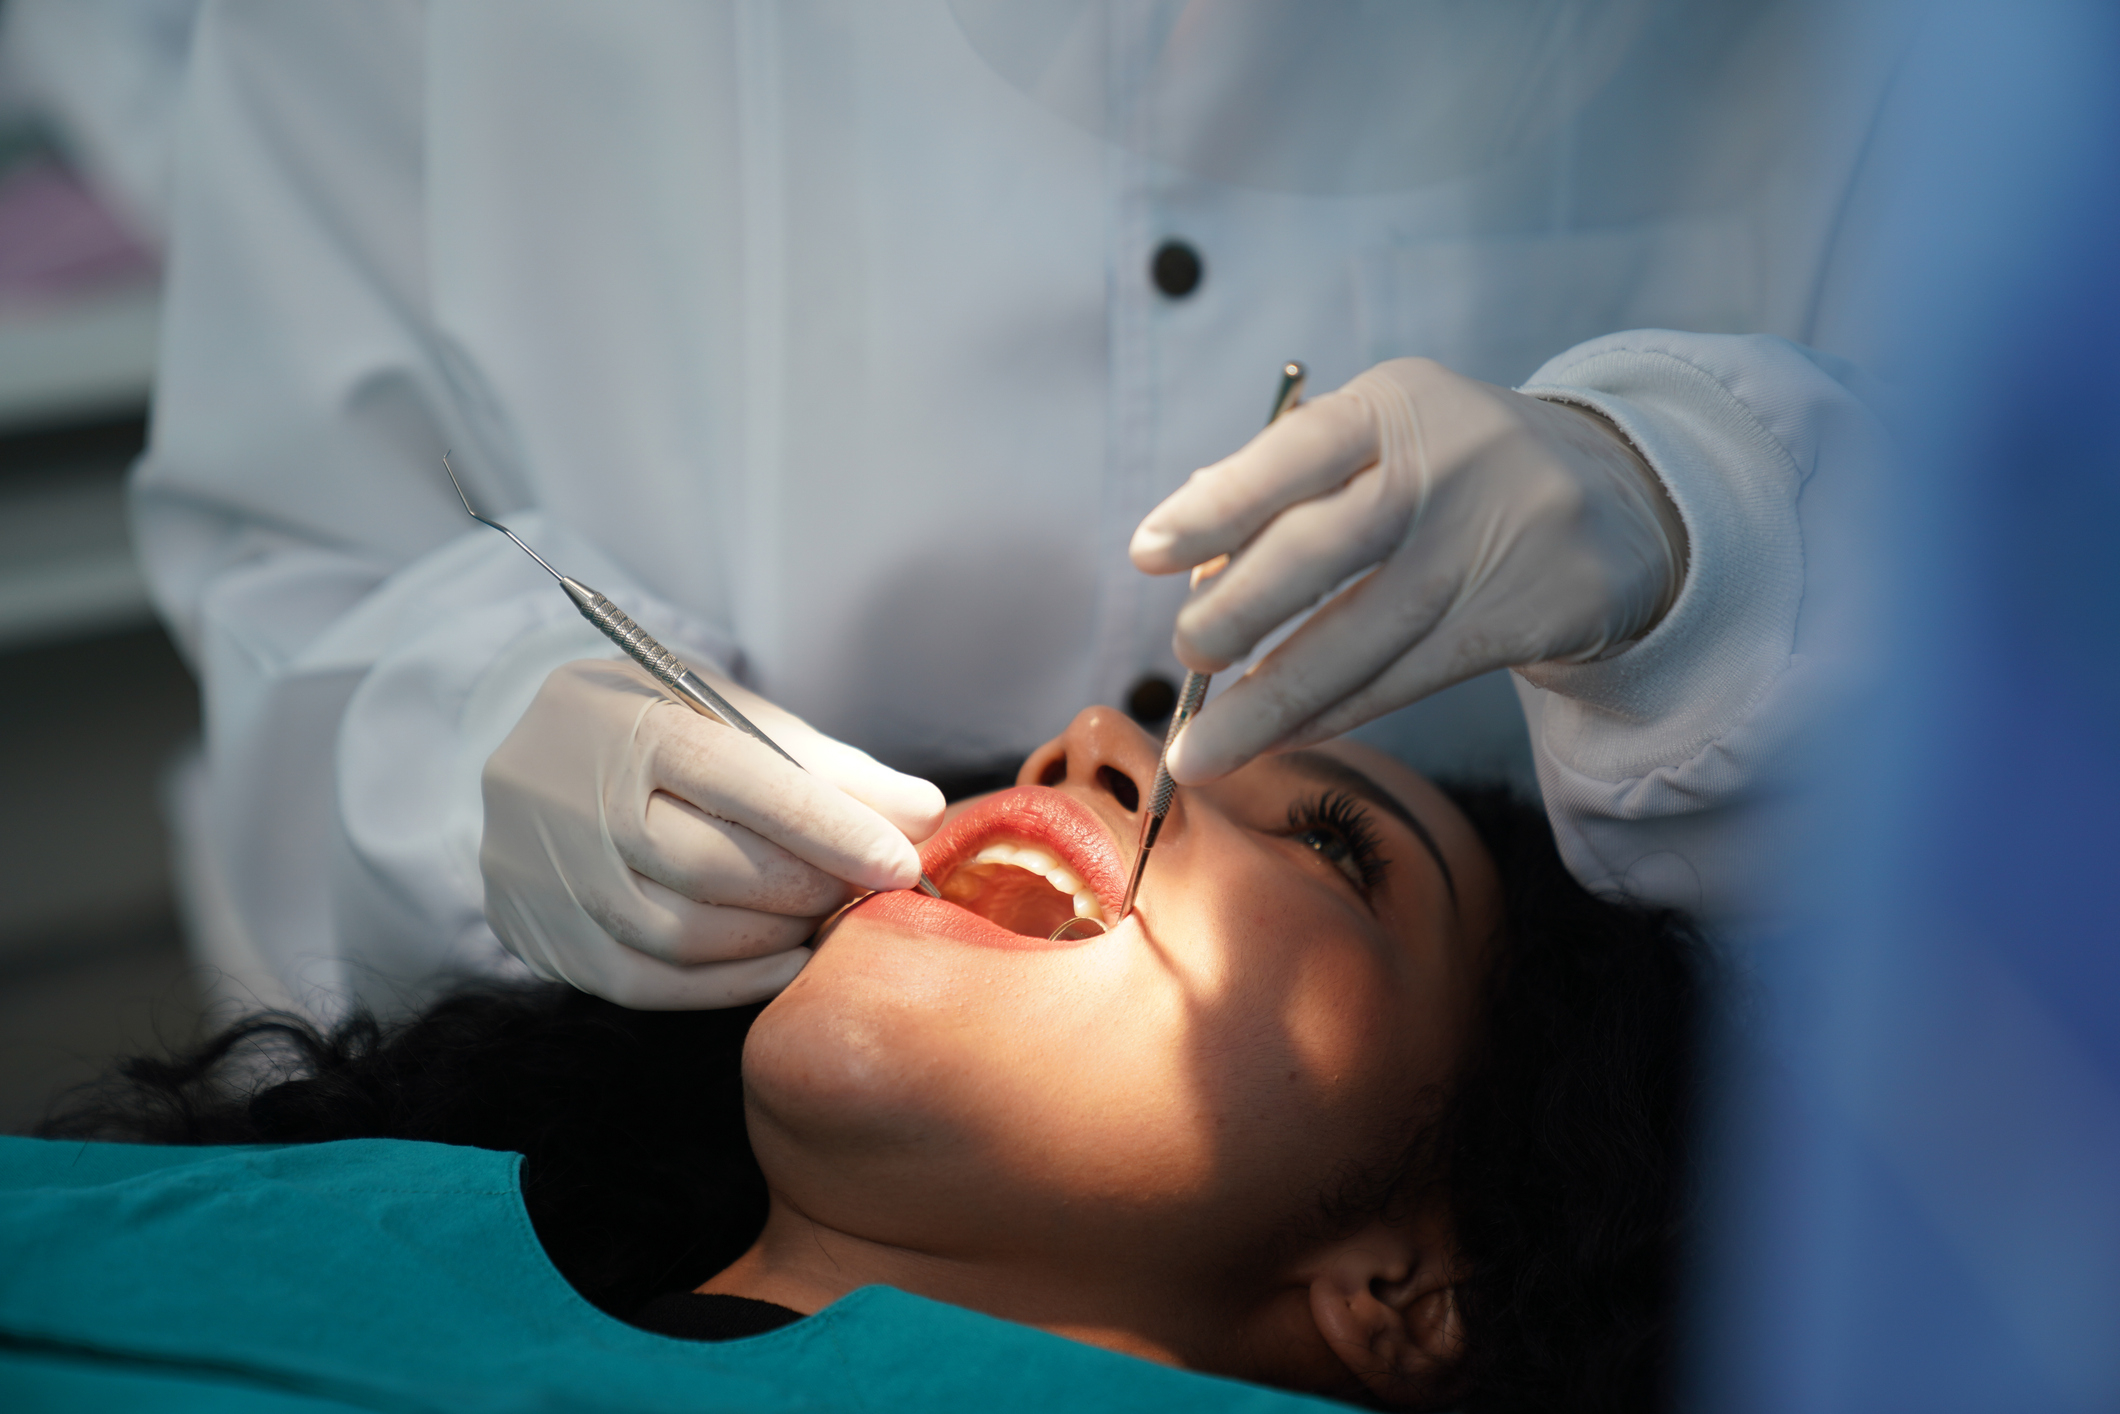 A dentist in a white coat and gloves performs a dental examination on a patient who is lying back in a dental chair, mouth open